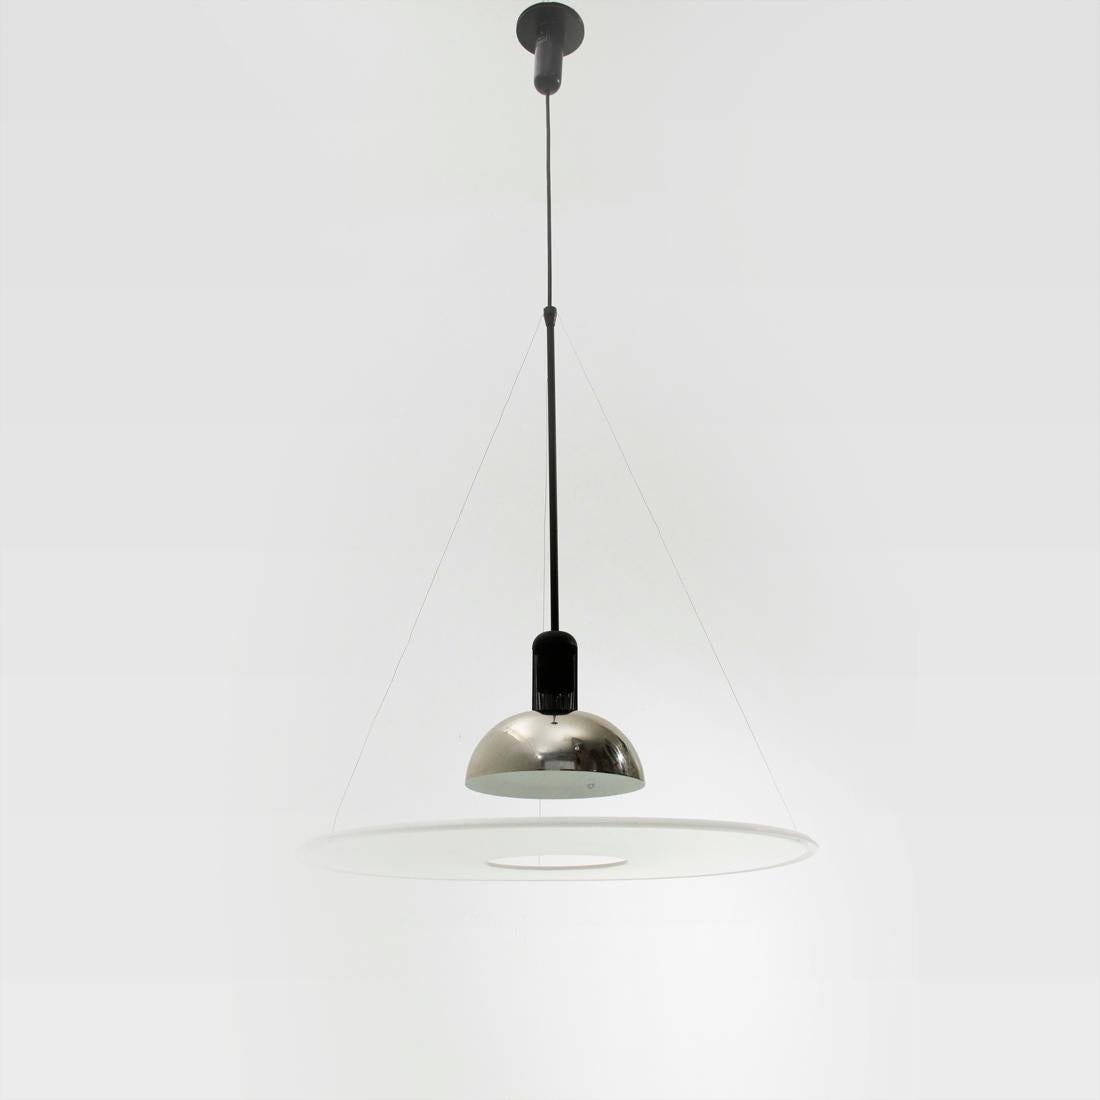 Chandelier produced in the 1970s by Flos on a project by Achille Castiglioni.
Suspension lamp with direct light, diffused and reflected.
Diffuser plate in injection-molded opaque polymethylmethacrylate, attached to the body of the device by three